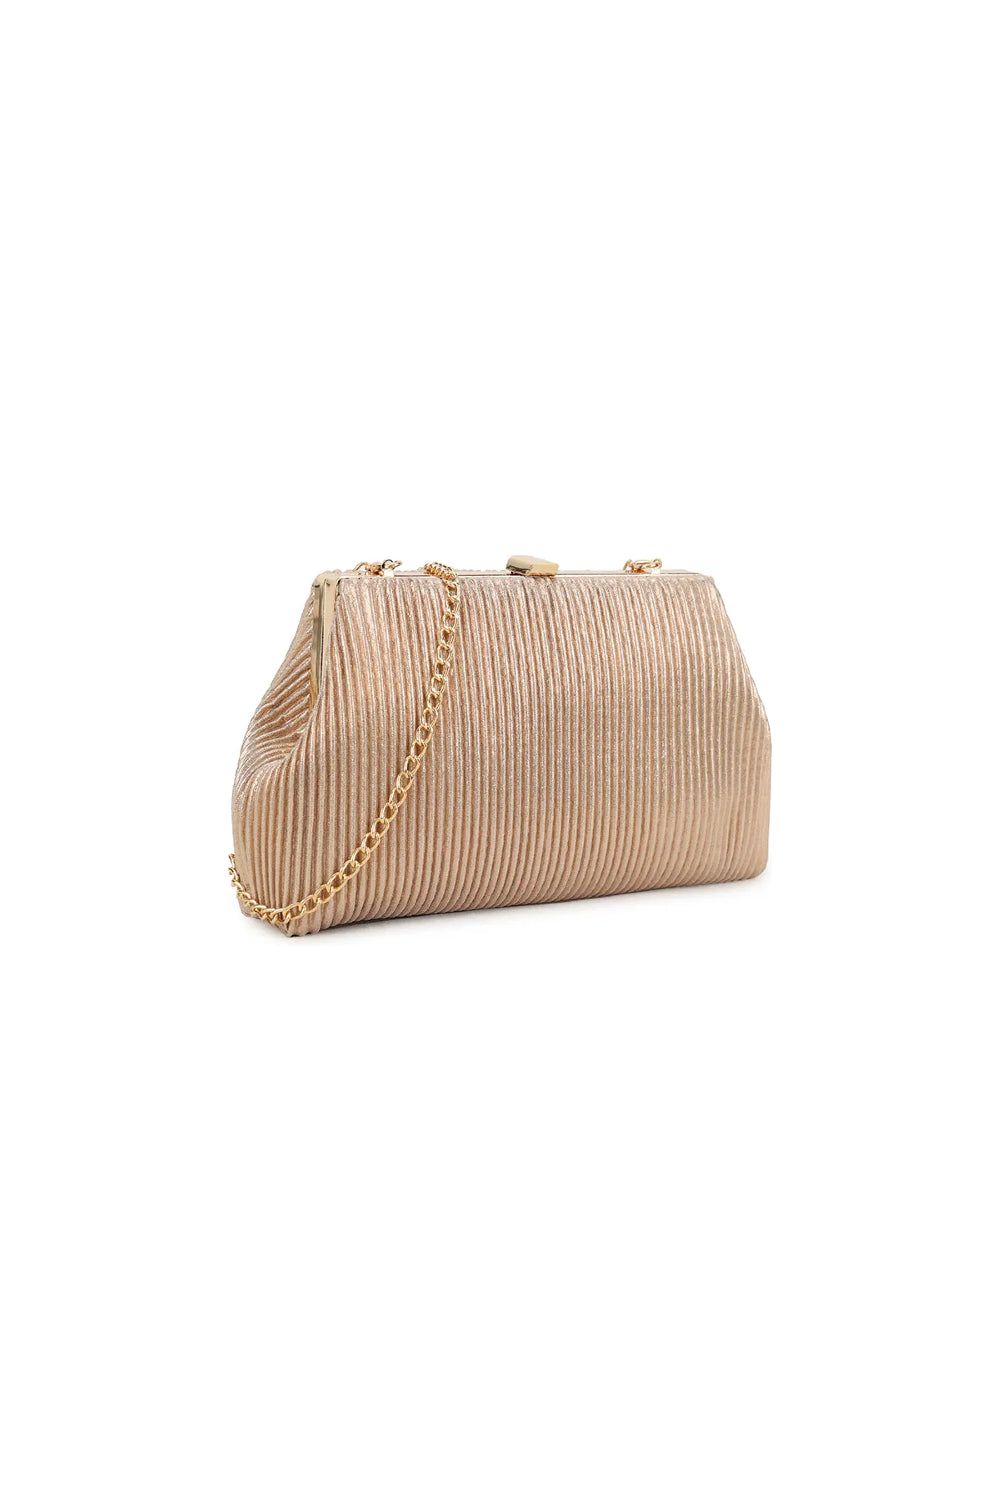 Rose Gold Glitter Clutch Bag With Removable Chain ALZ3044